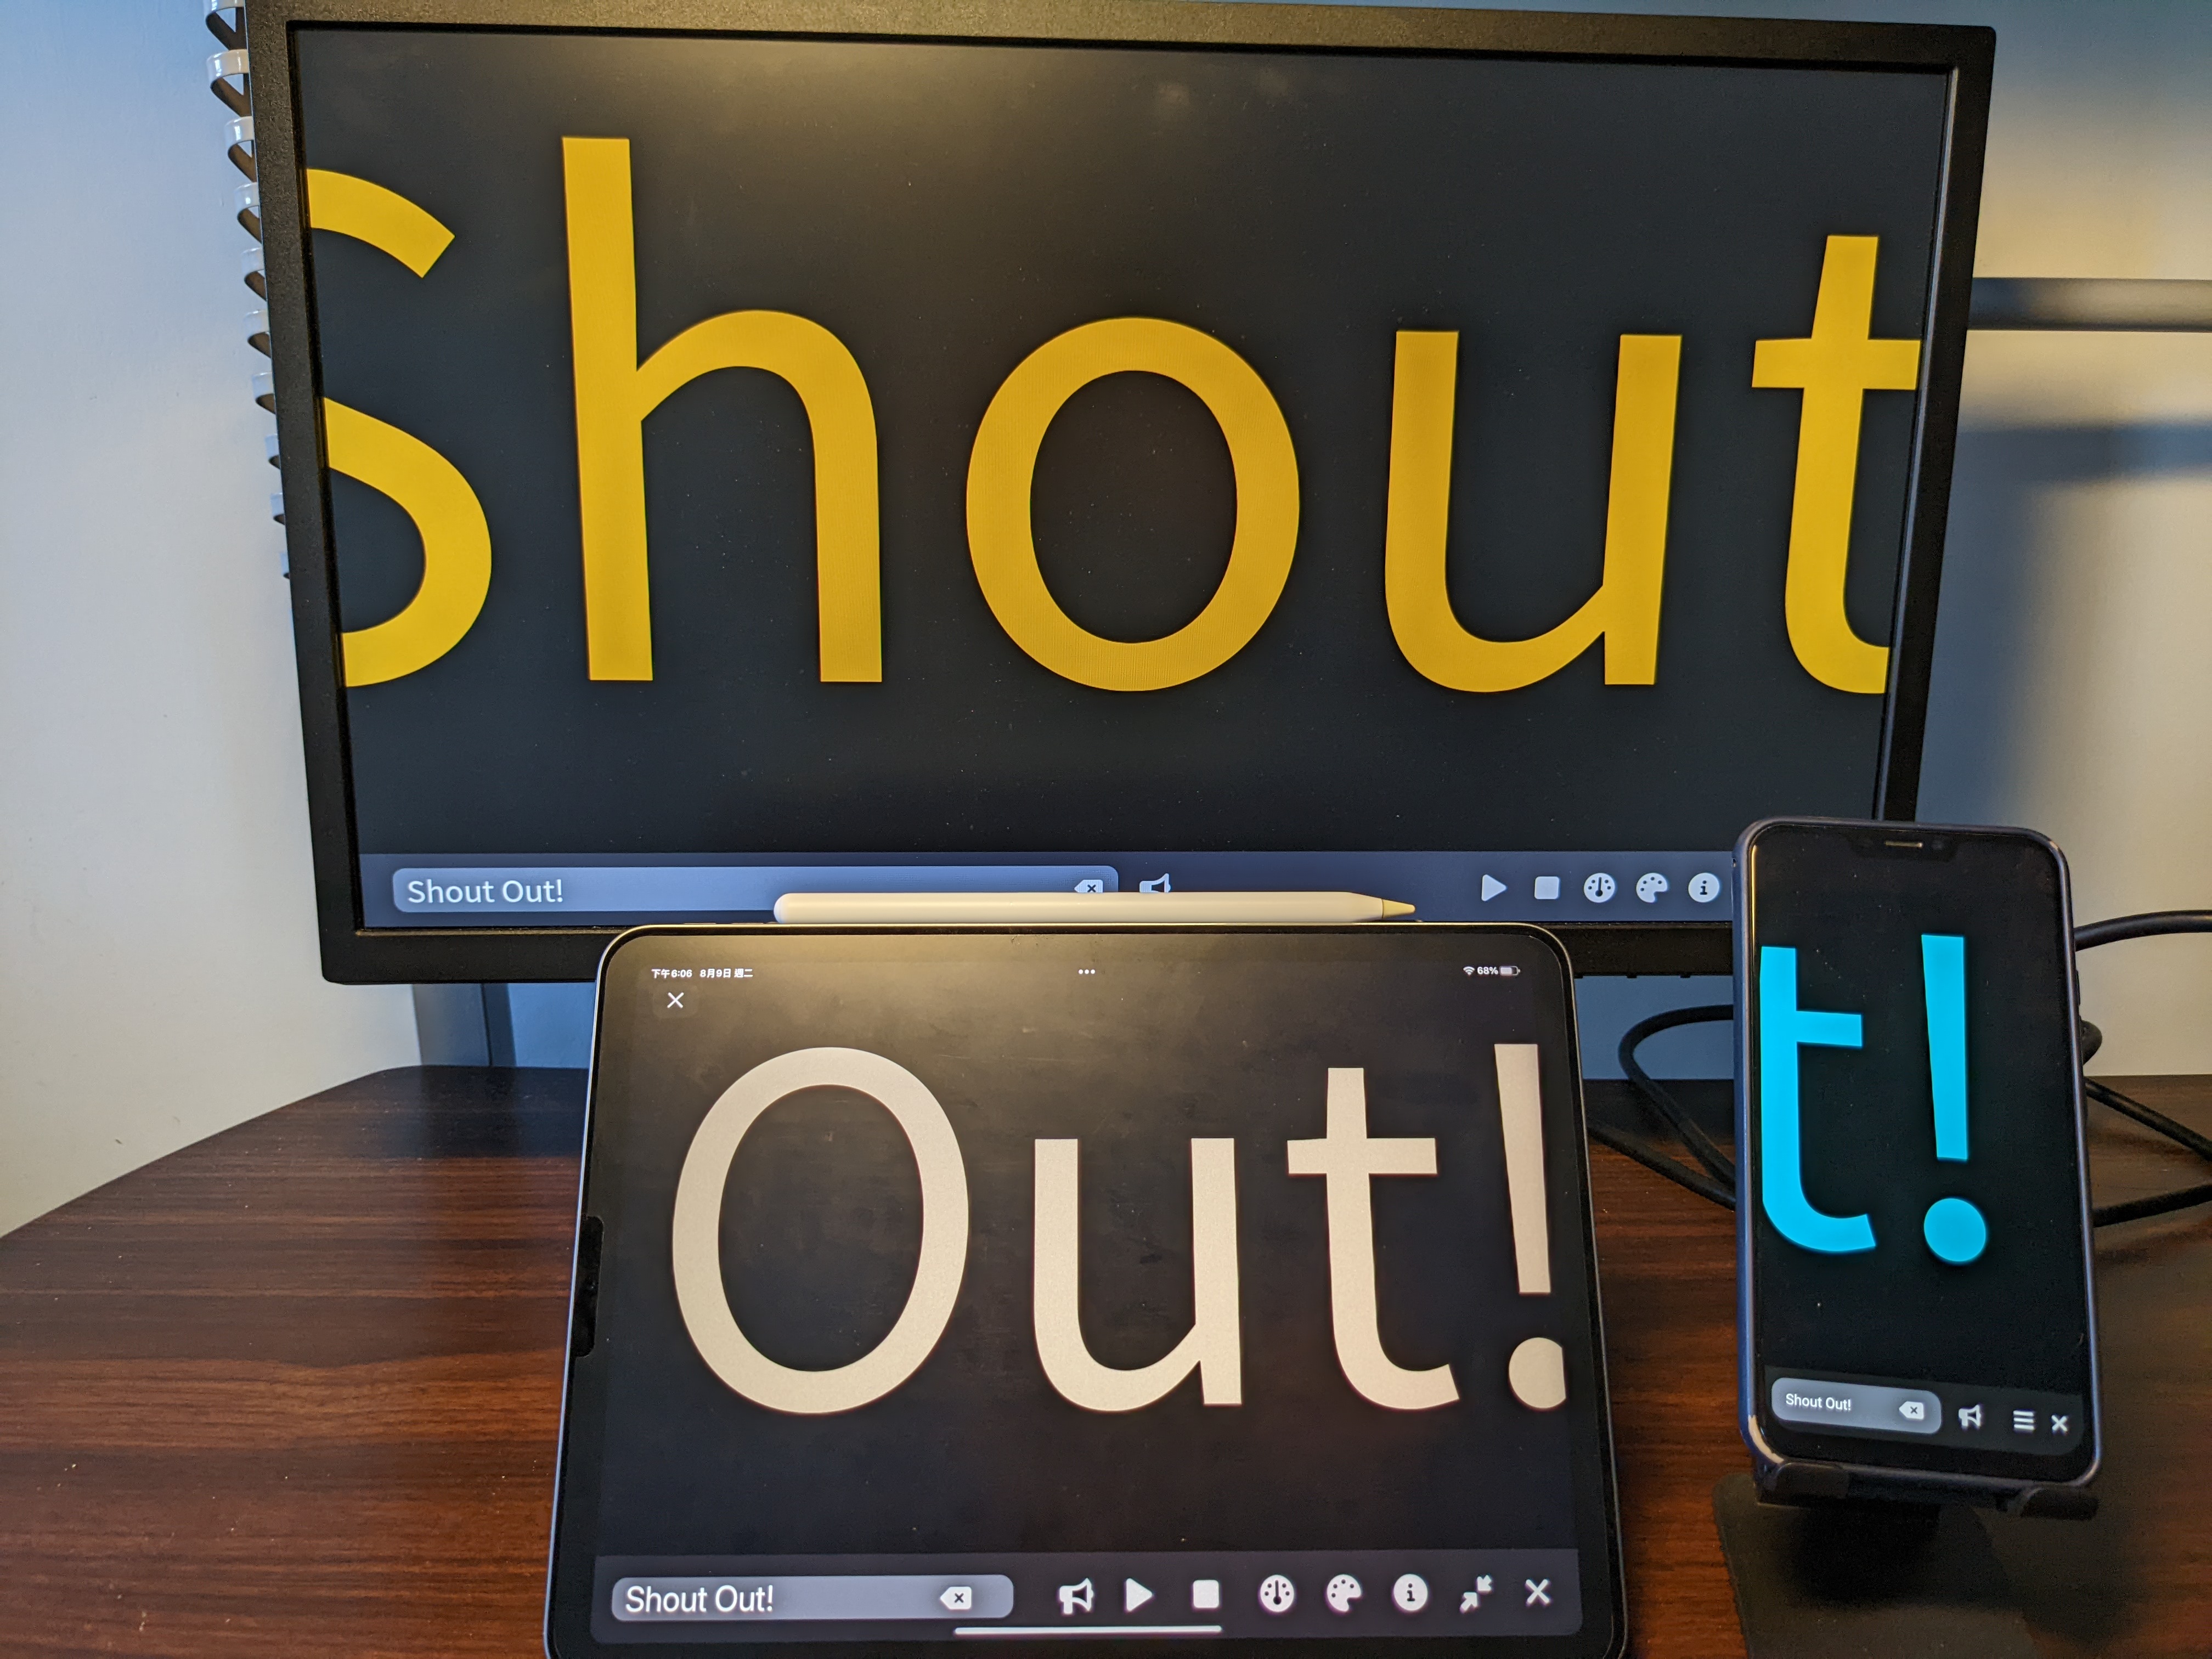 a photo with a screen monitor, a tablet, and a smartphone displaying "Shout Out!" with this app